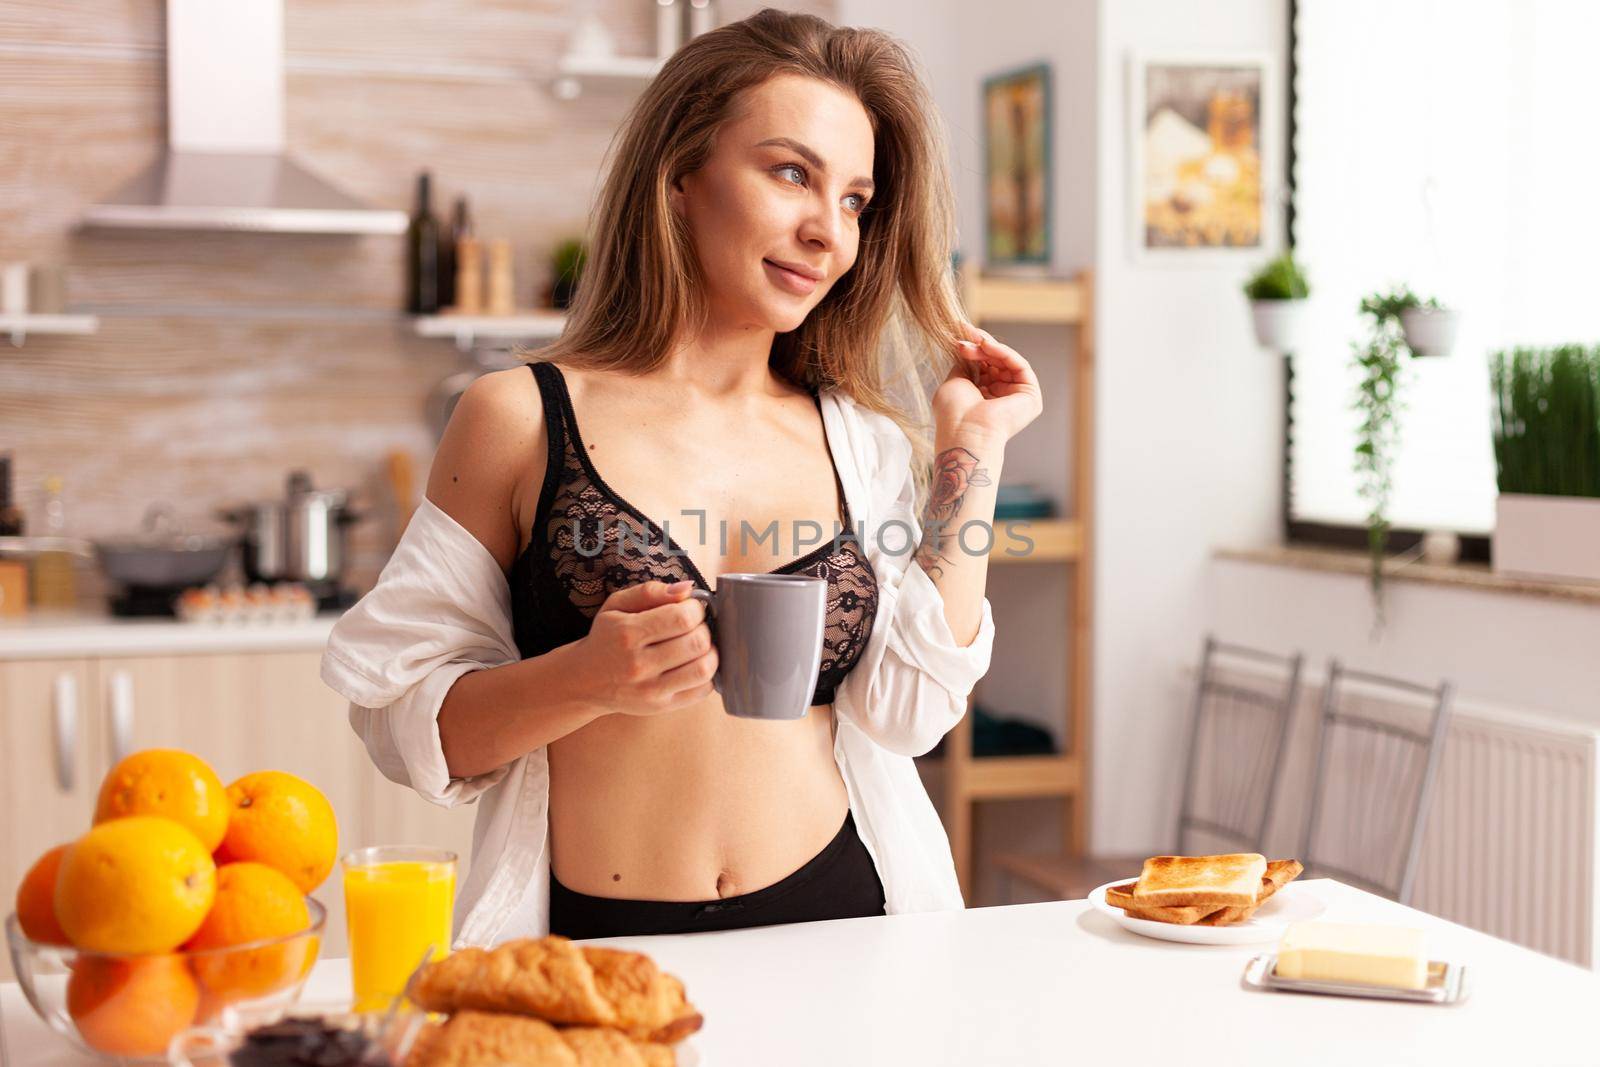 Young woman wearing sexy lingerie during breakfast in home kitchen. Attractive lady with tattoos in seductive underwear holding cup of tea relaxing in the kitchen smiling.